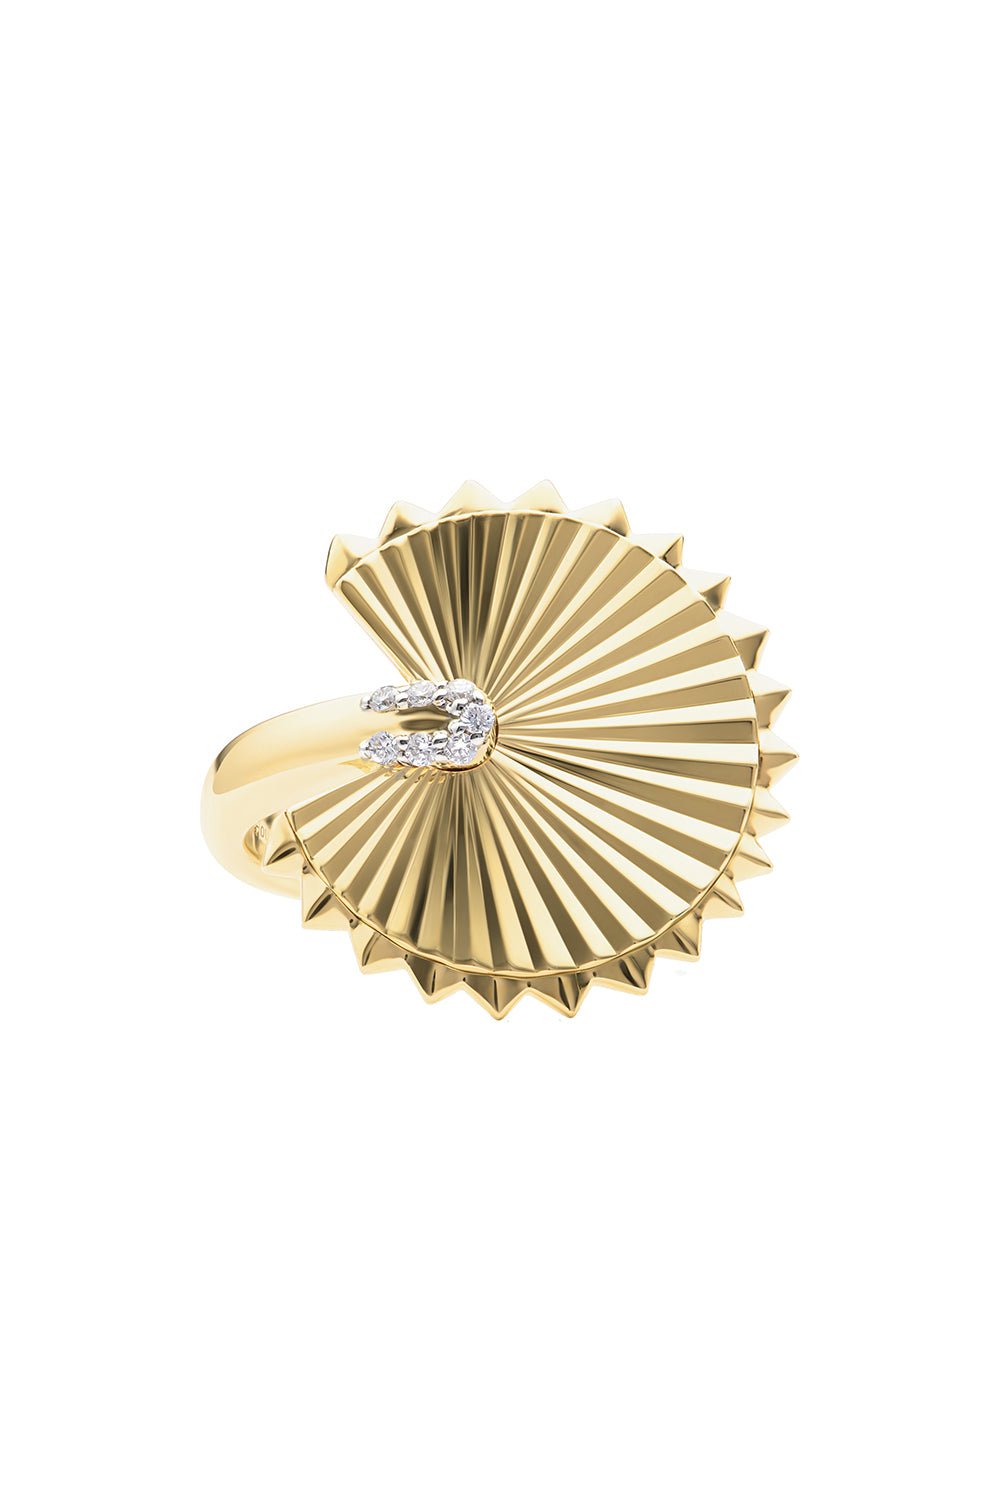 PHILLIPS HOUSE-Aura Fan Ring-YELLOW GOLD